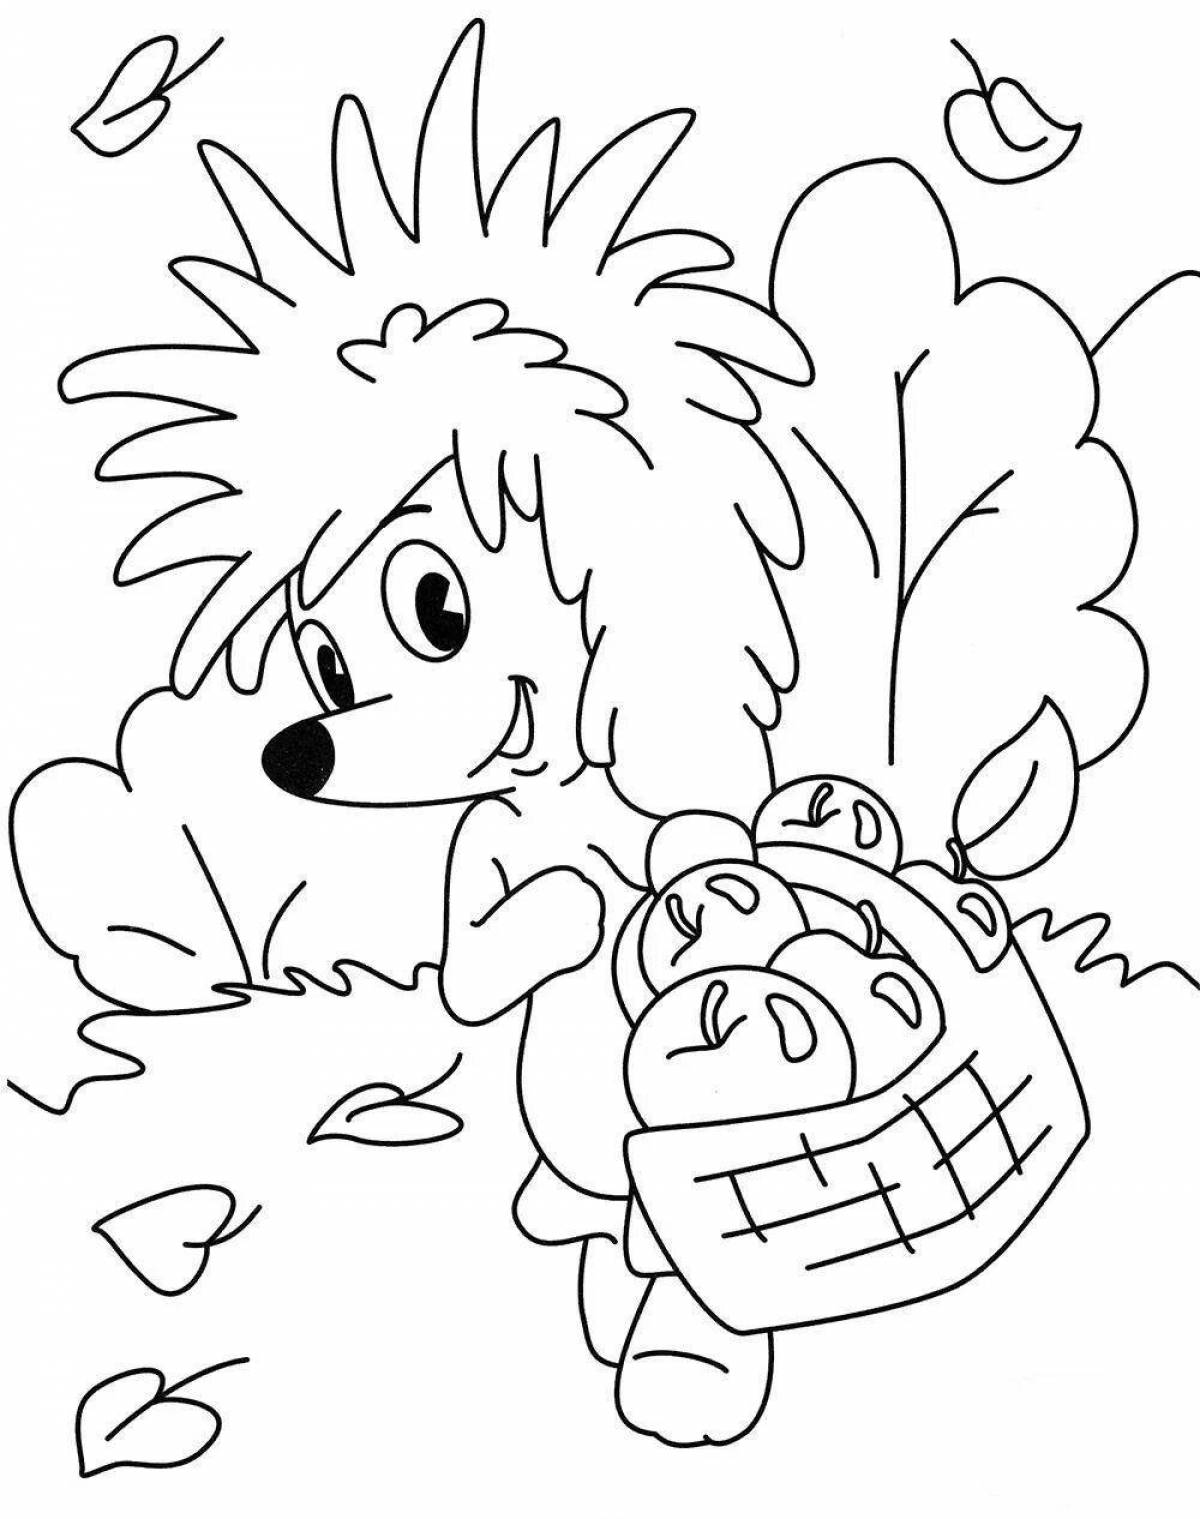 Exciting hedgehog coloring book for kids